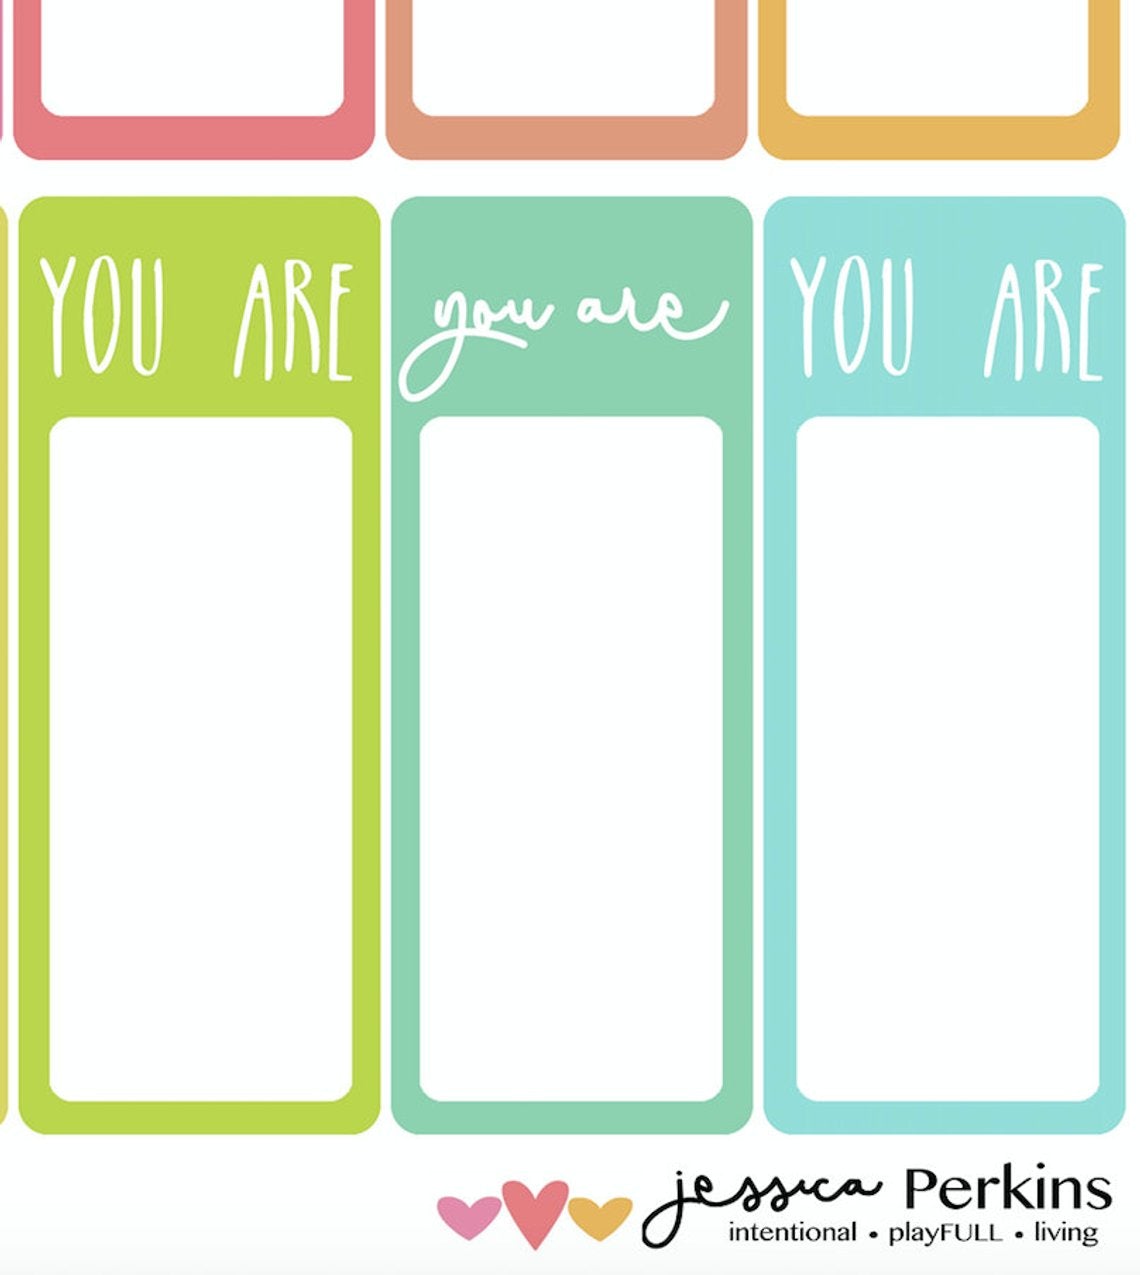 YOU ARE - Blank - Affirmation Notes - Printable - .pdf | Jessica Perkins